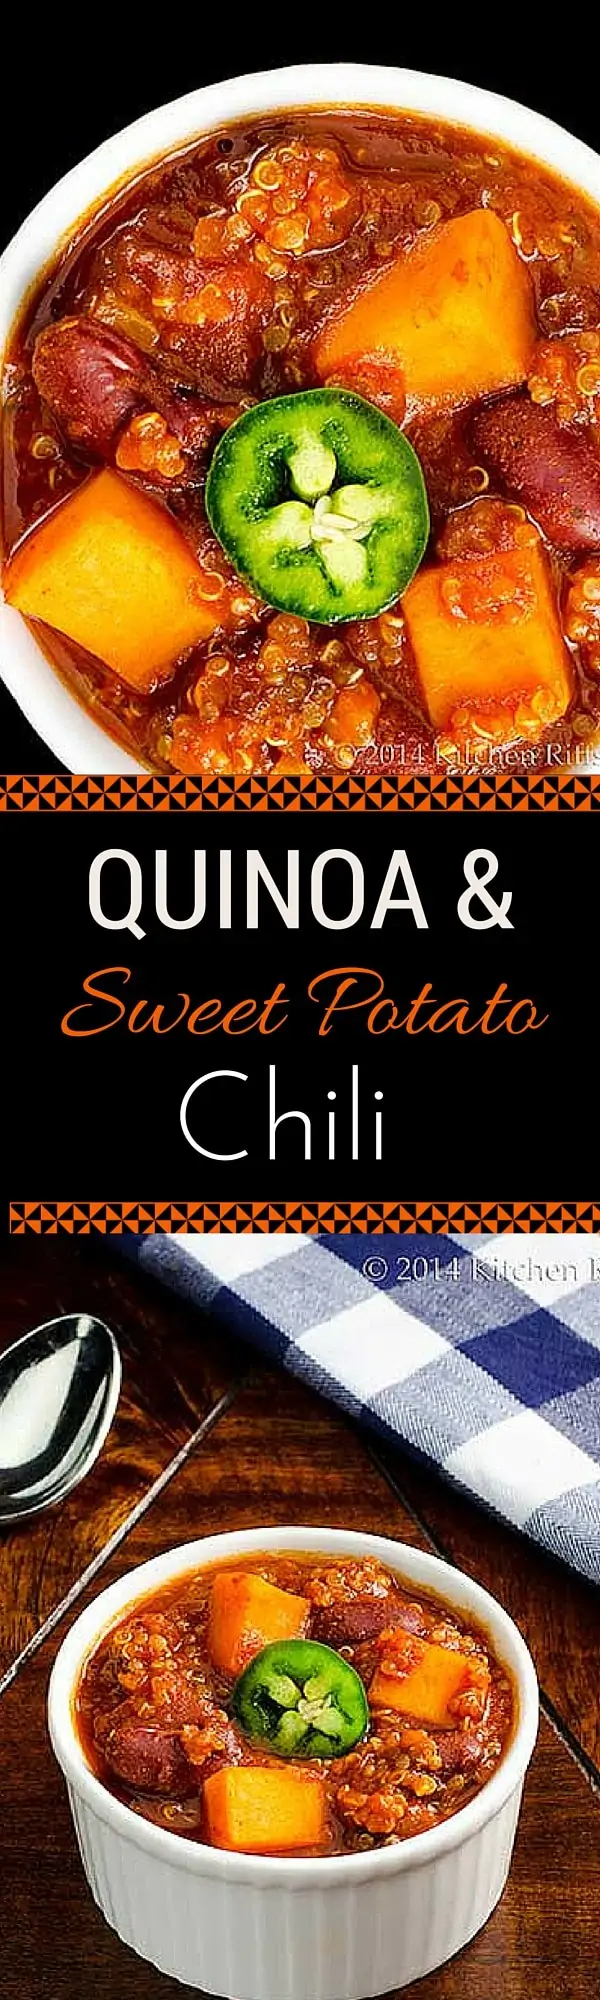 Quinoa and Sweet Potato Chili - This amazing vegan chili has all of the flavor and none of the fat of traditional chili. You won't believe how delicious it is!